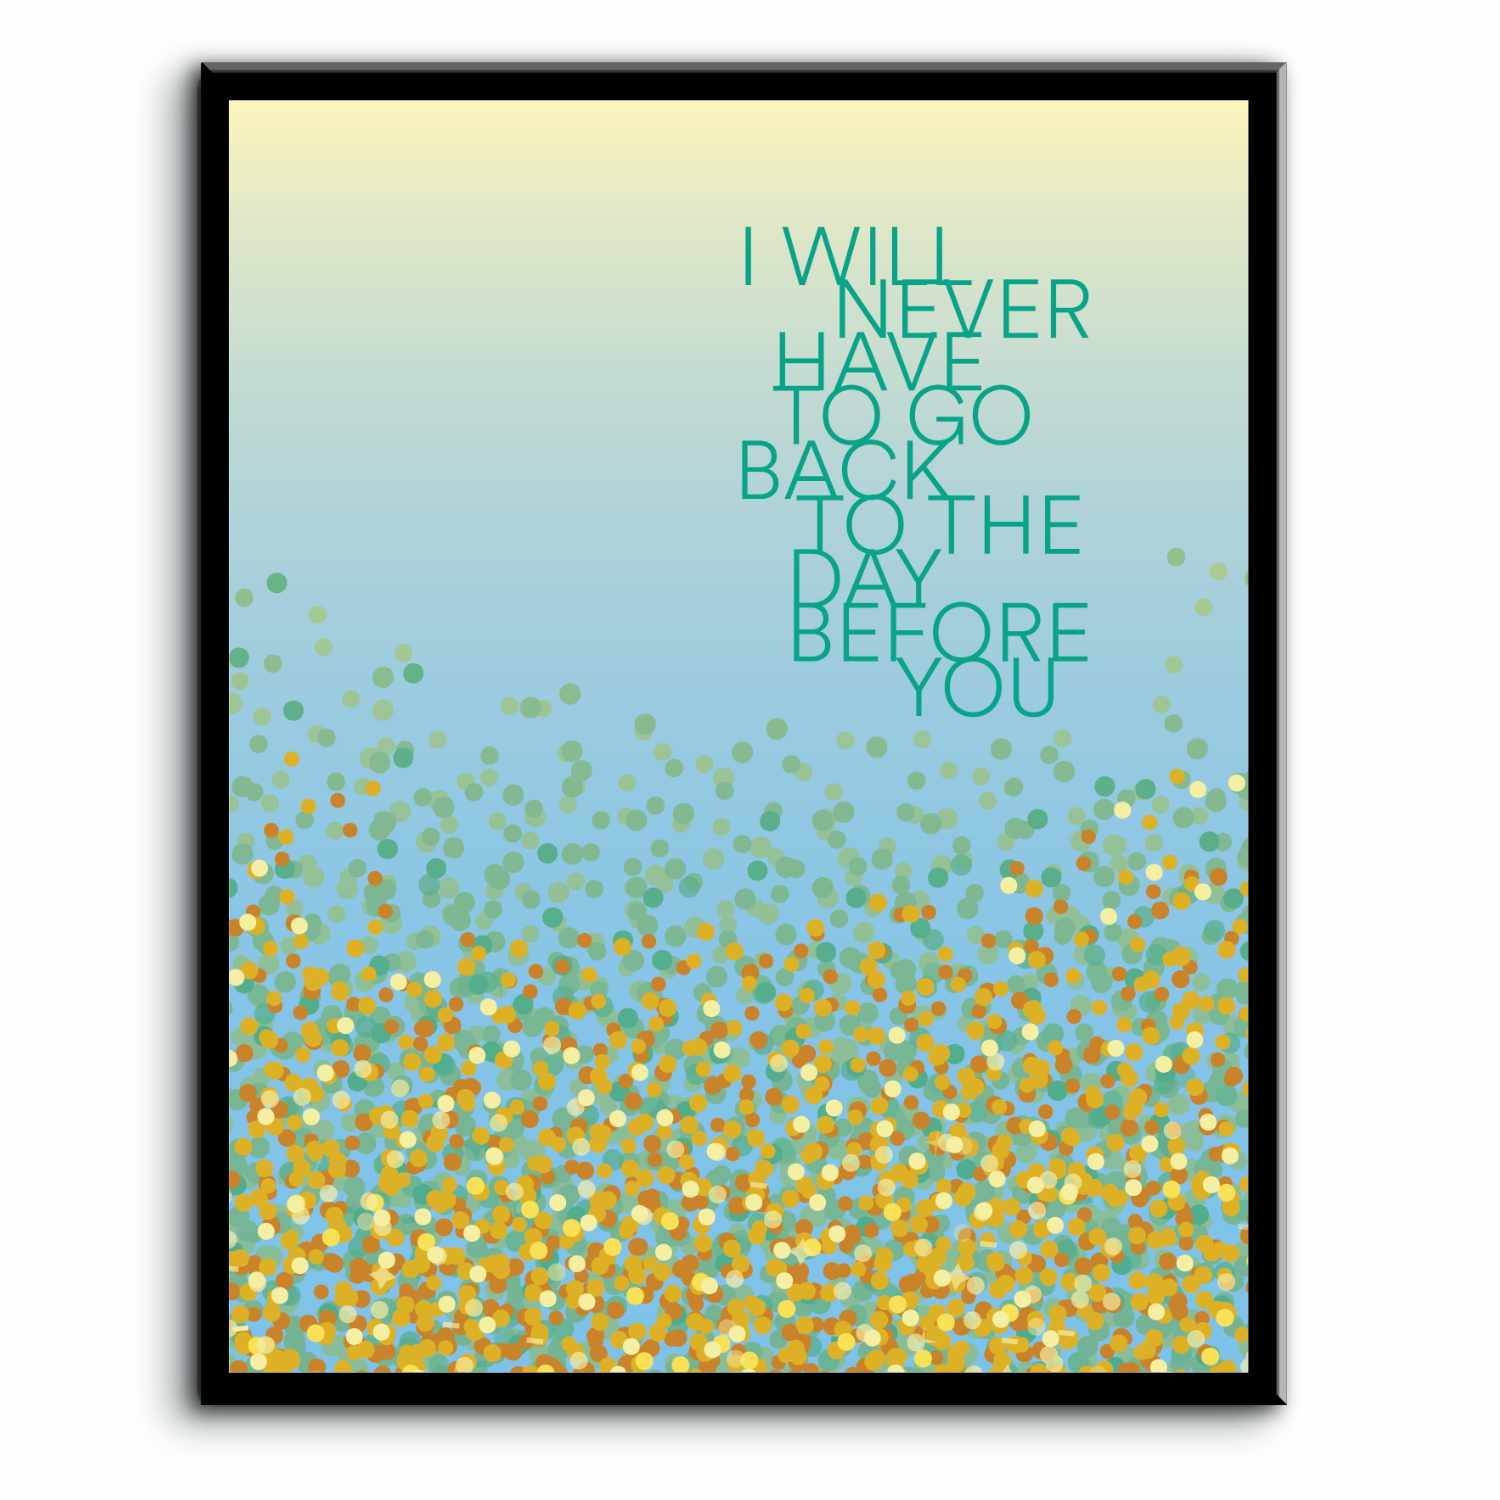 The Day Before You by Matthew West - Song Lyric Art Print Song Lyrics Art Song Lyrics Art 8x10 Plaque Mount 